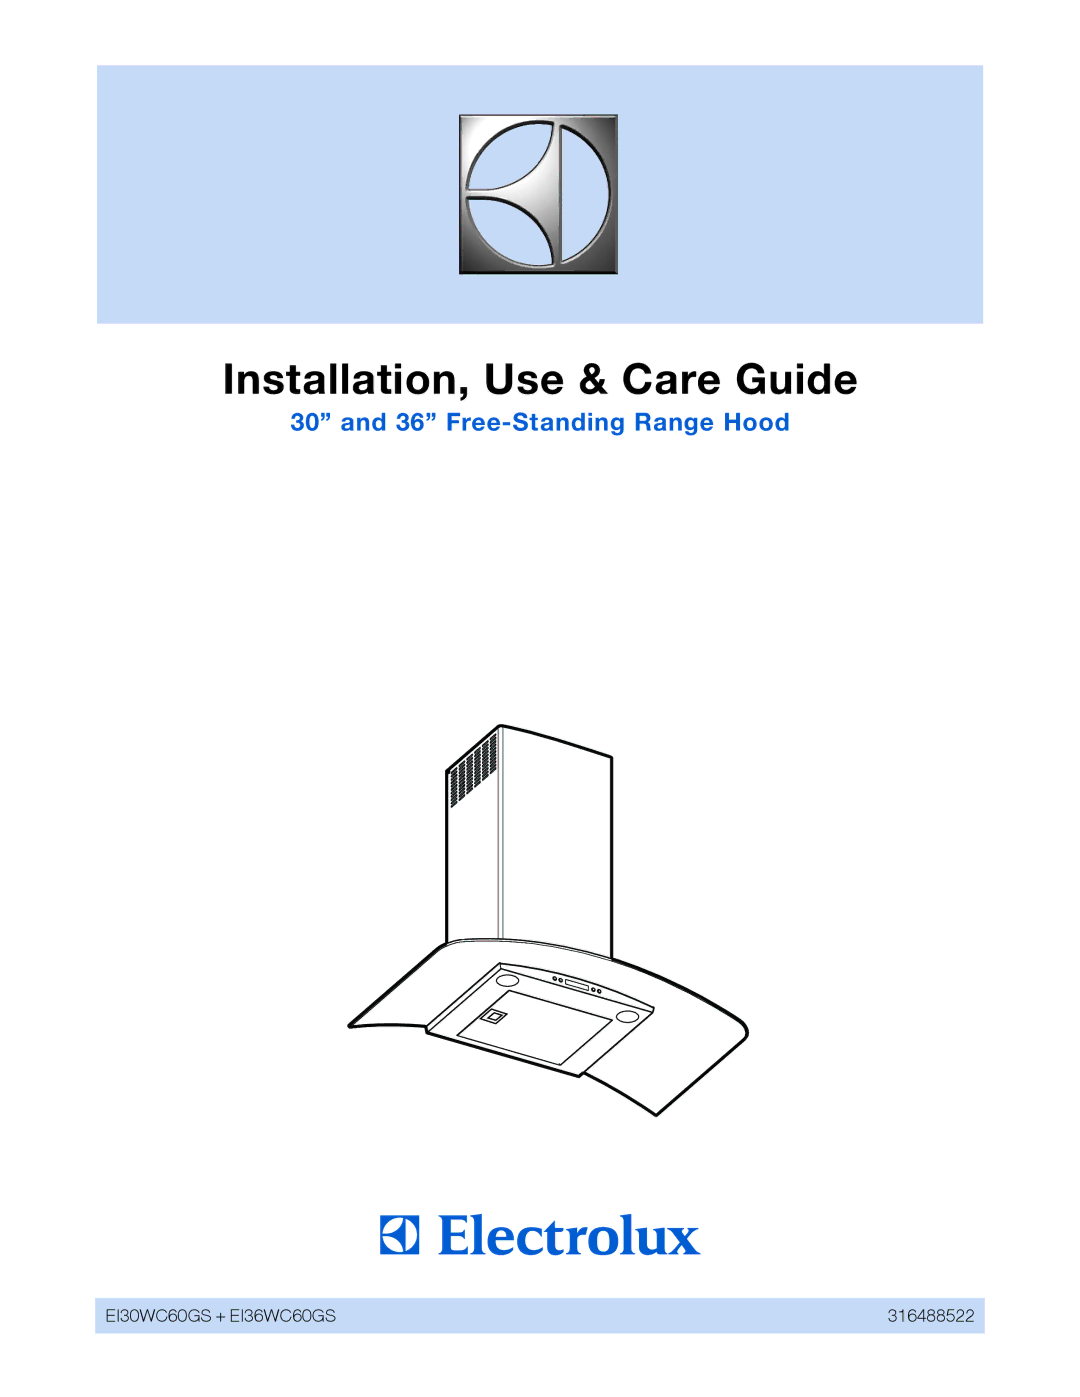 Electrolux EI36WC60GS, EI30WC60GS manual Installation, Use & Care Guide 